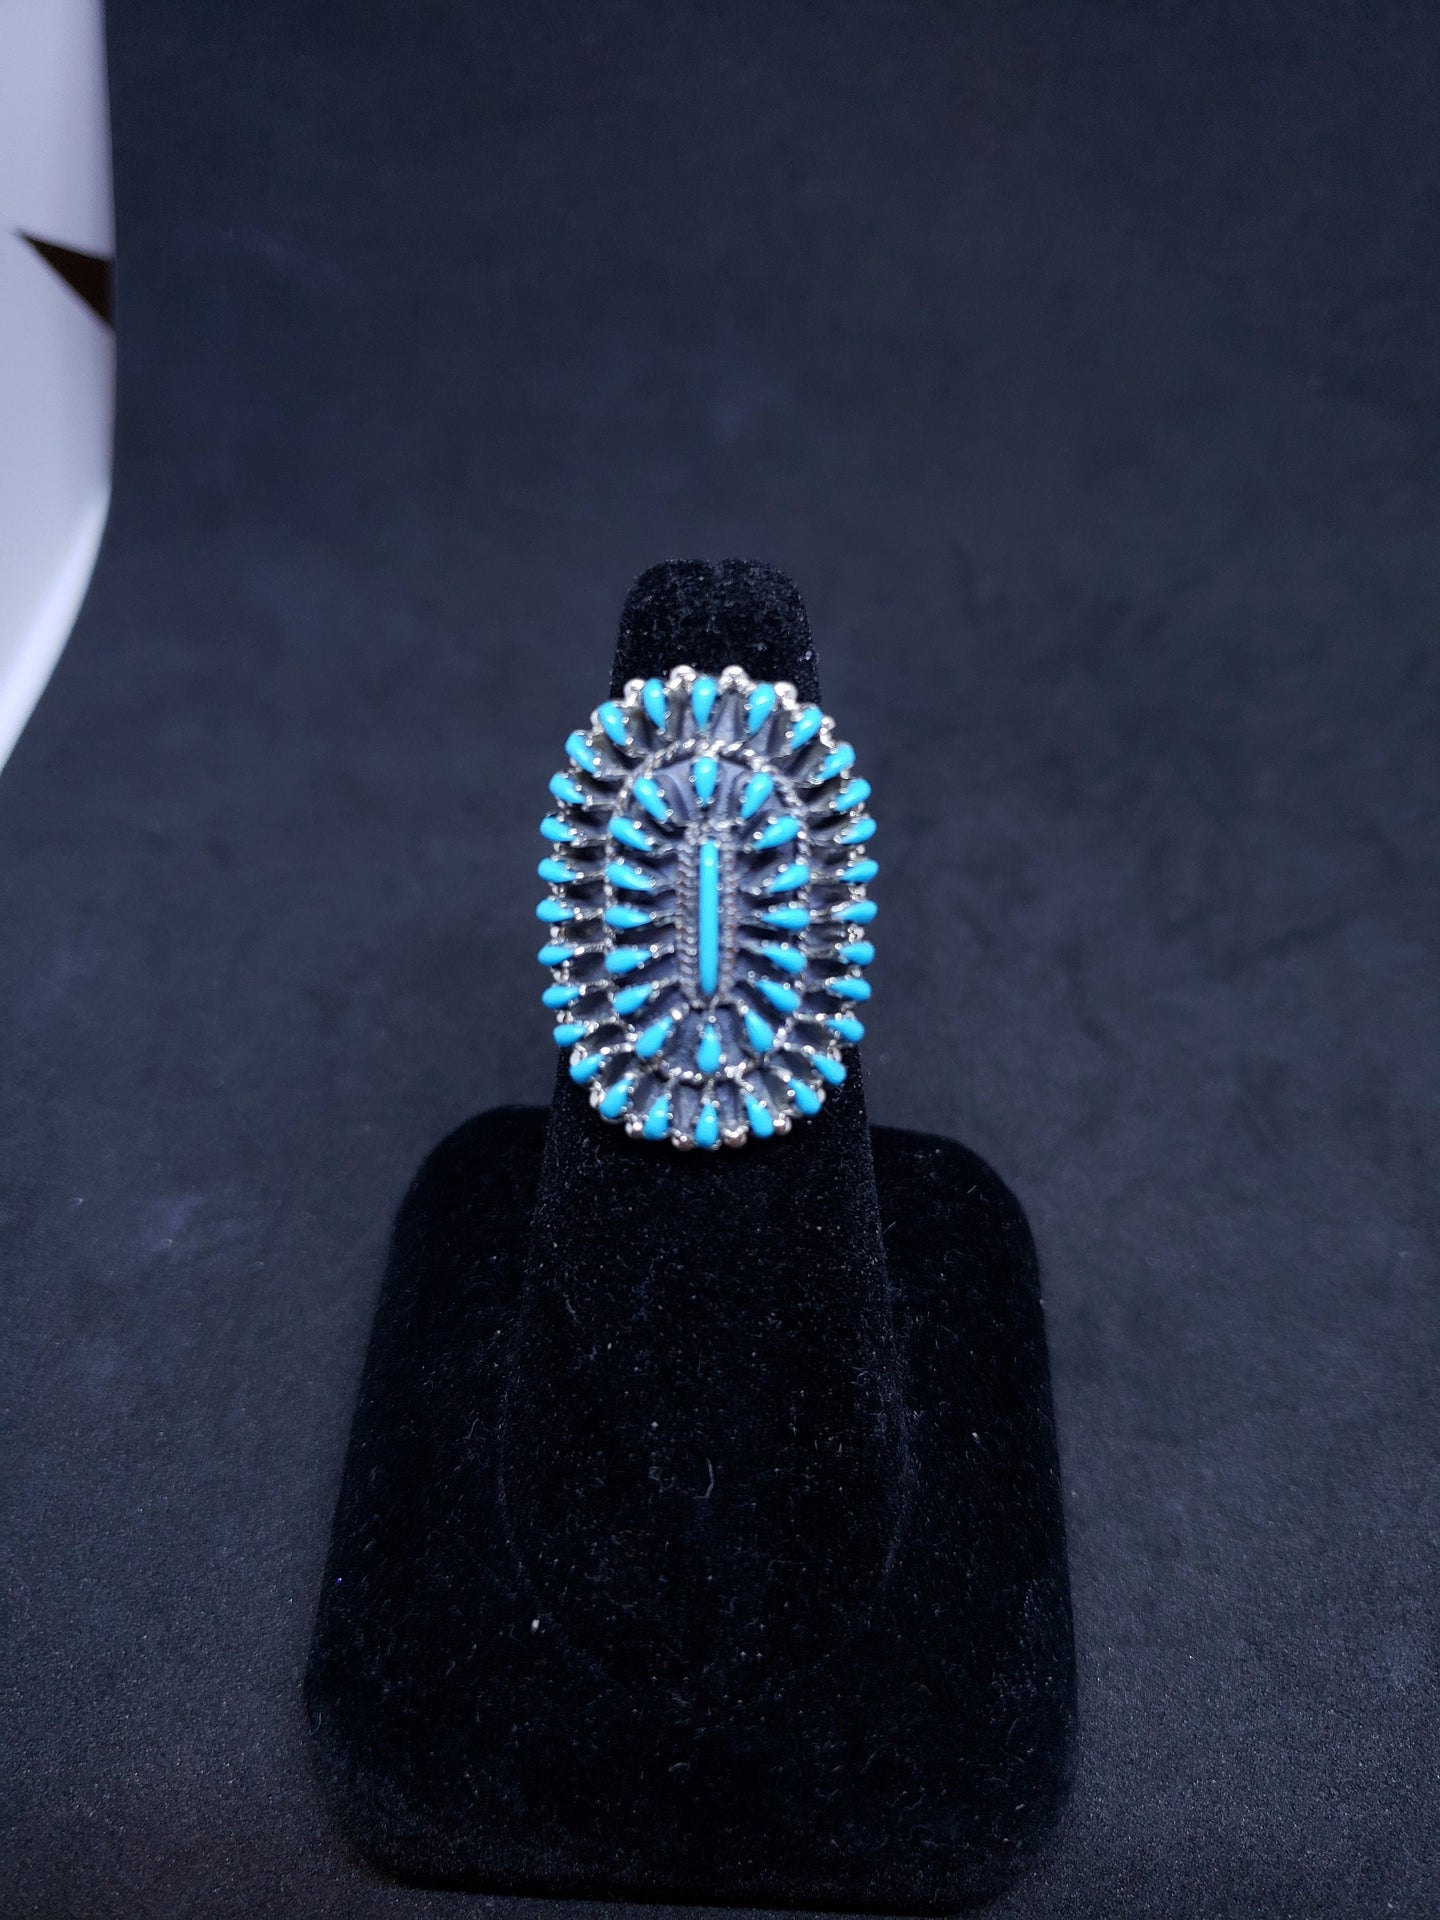 vintage Native American Zuni Cluster petit point sleeping beauty turquoise sterling silver ring - size 7 1/2 - adjustable ring